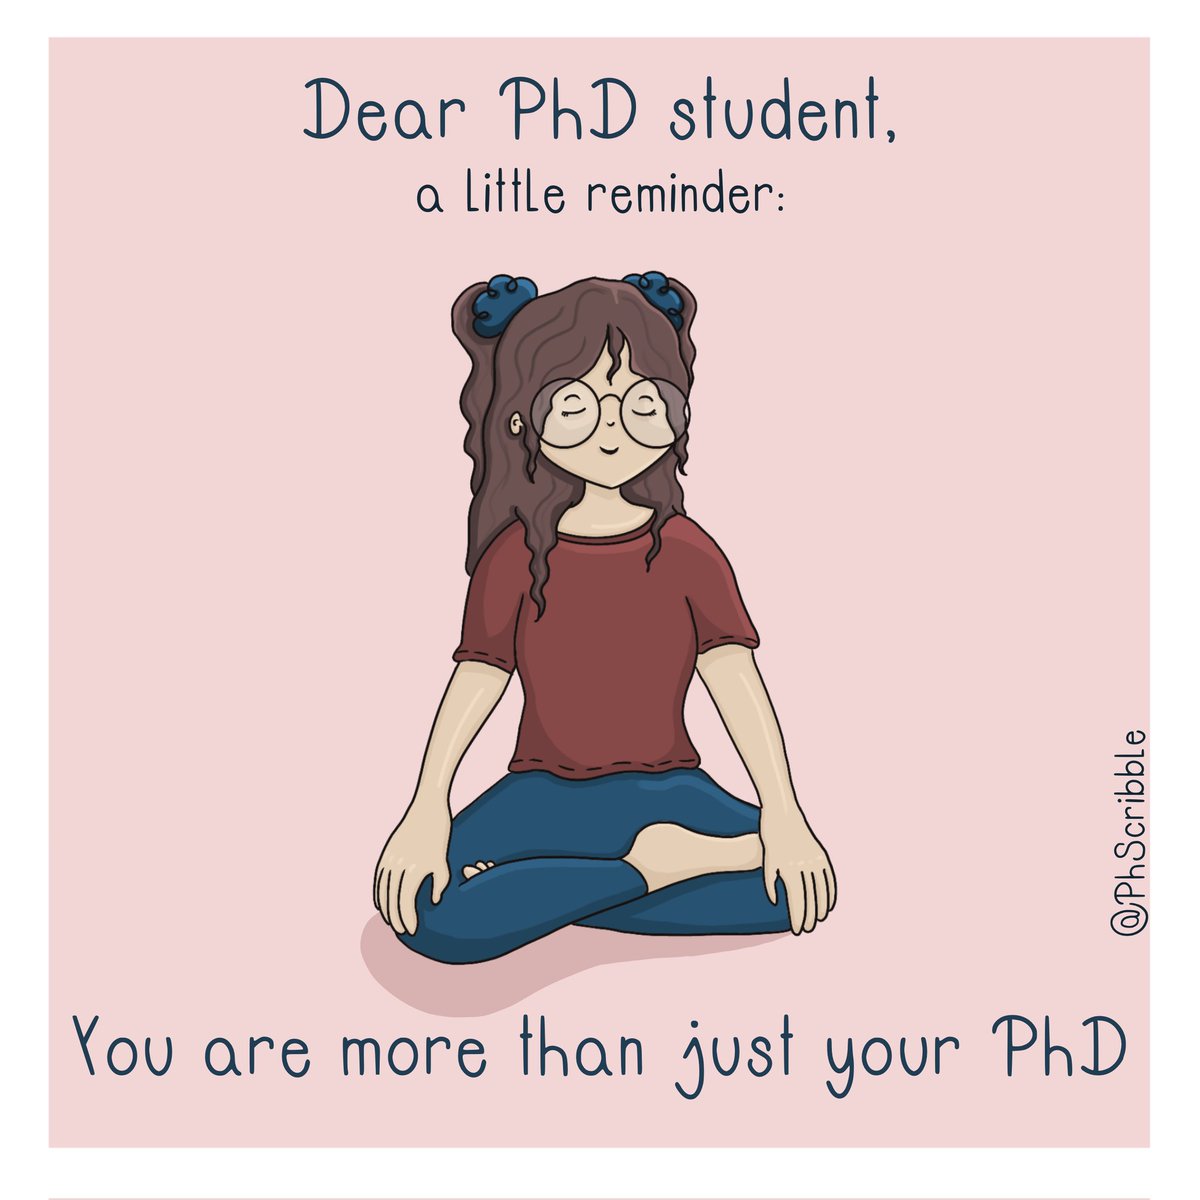 It's easy to become a workaholic in academia - but it's also important to remember that there is more in life than just a thesis

@OpenAcademics @thephdstory @phd_genie #phdchat #PhdLife #AcademicChatter #AcademicTwitter #womaninscience #academicmentalhealth #phdvoice #PhScribble